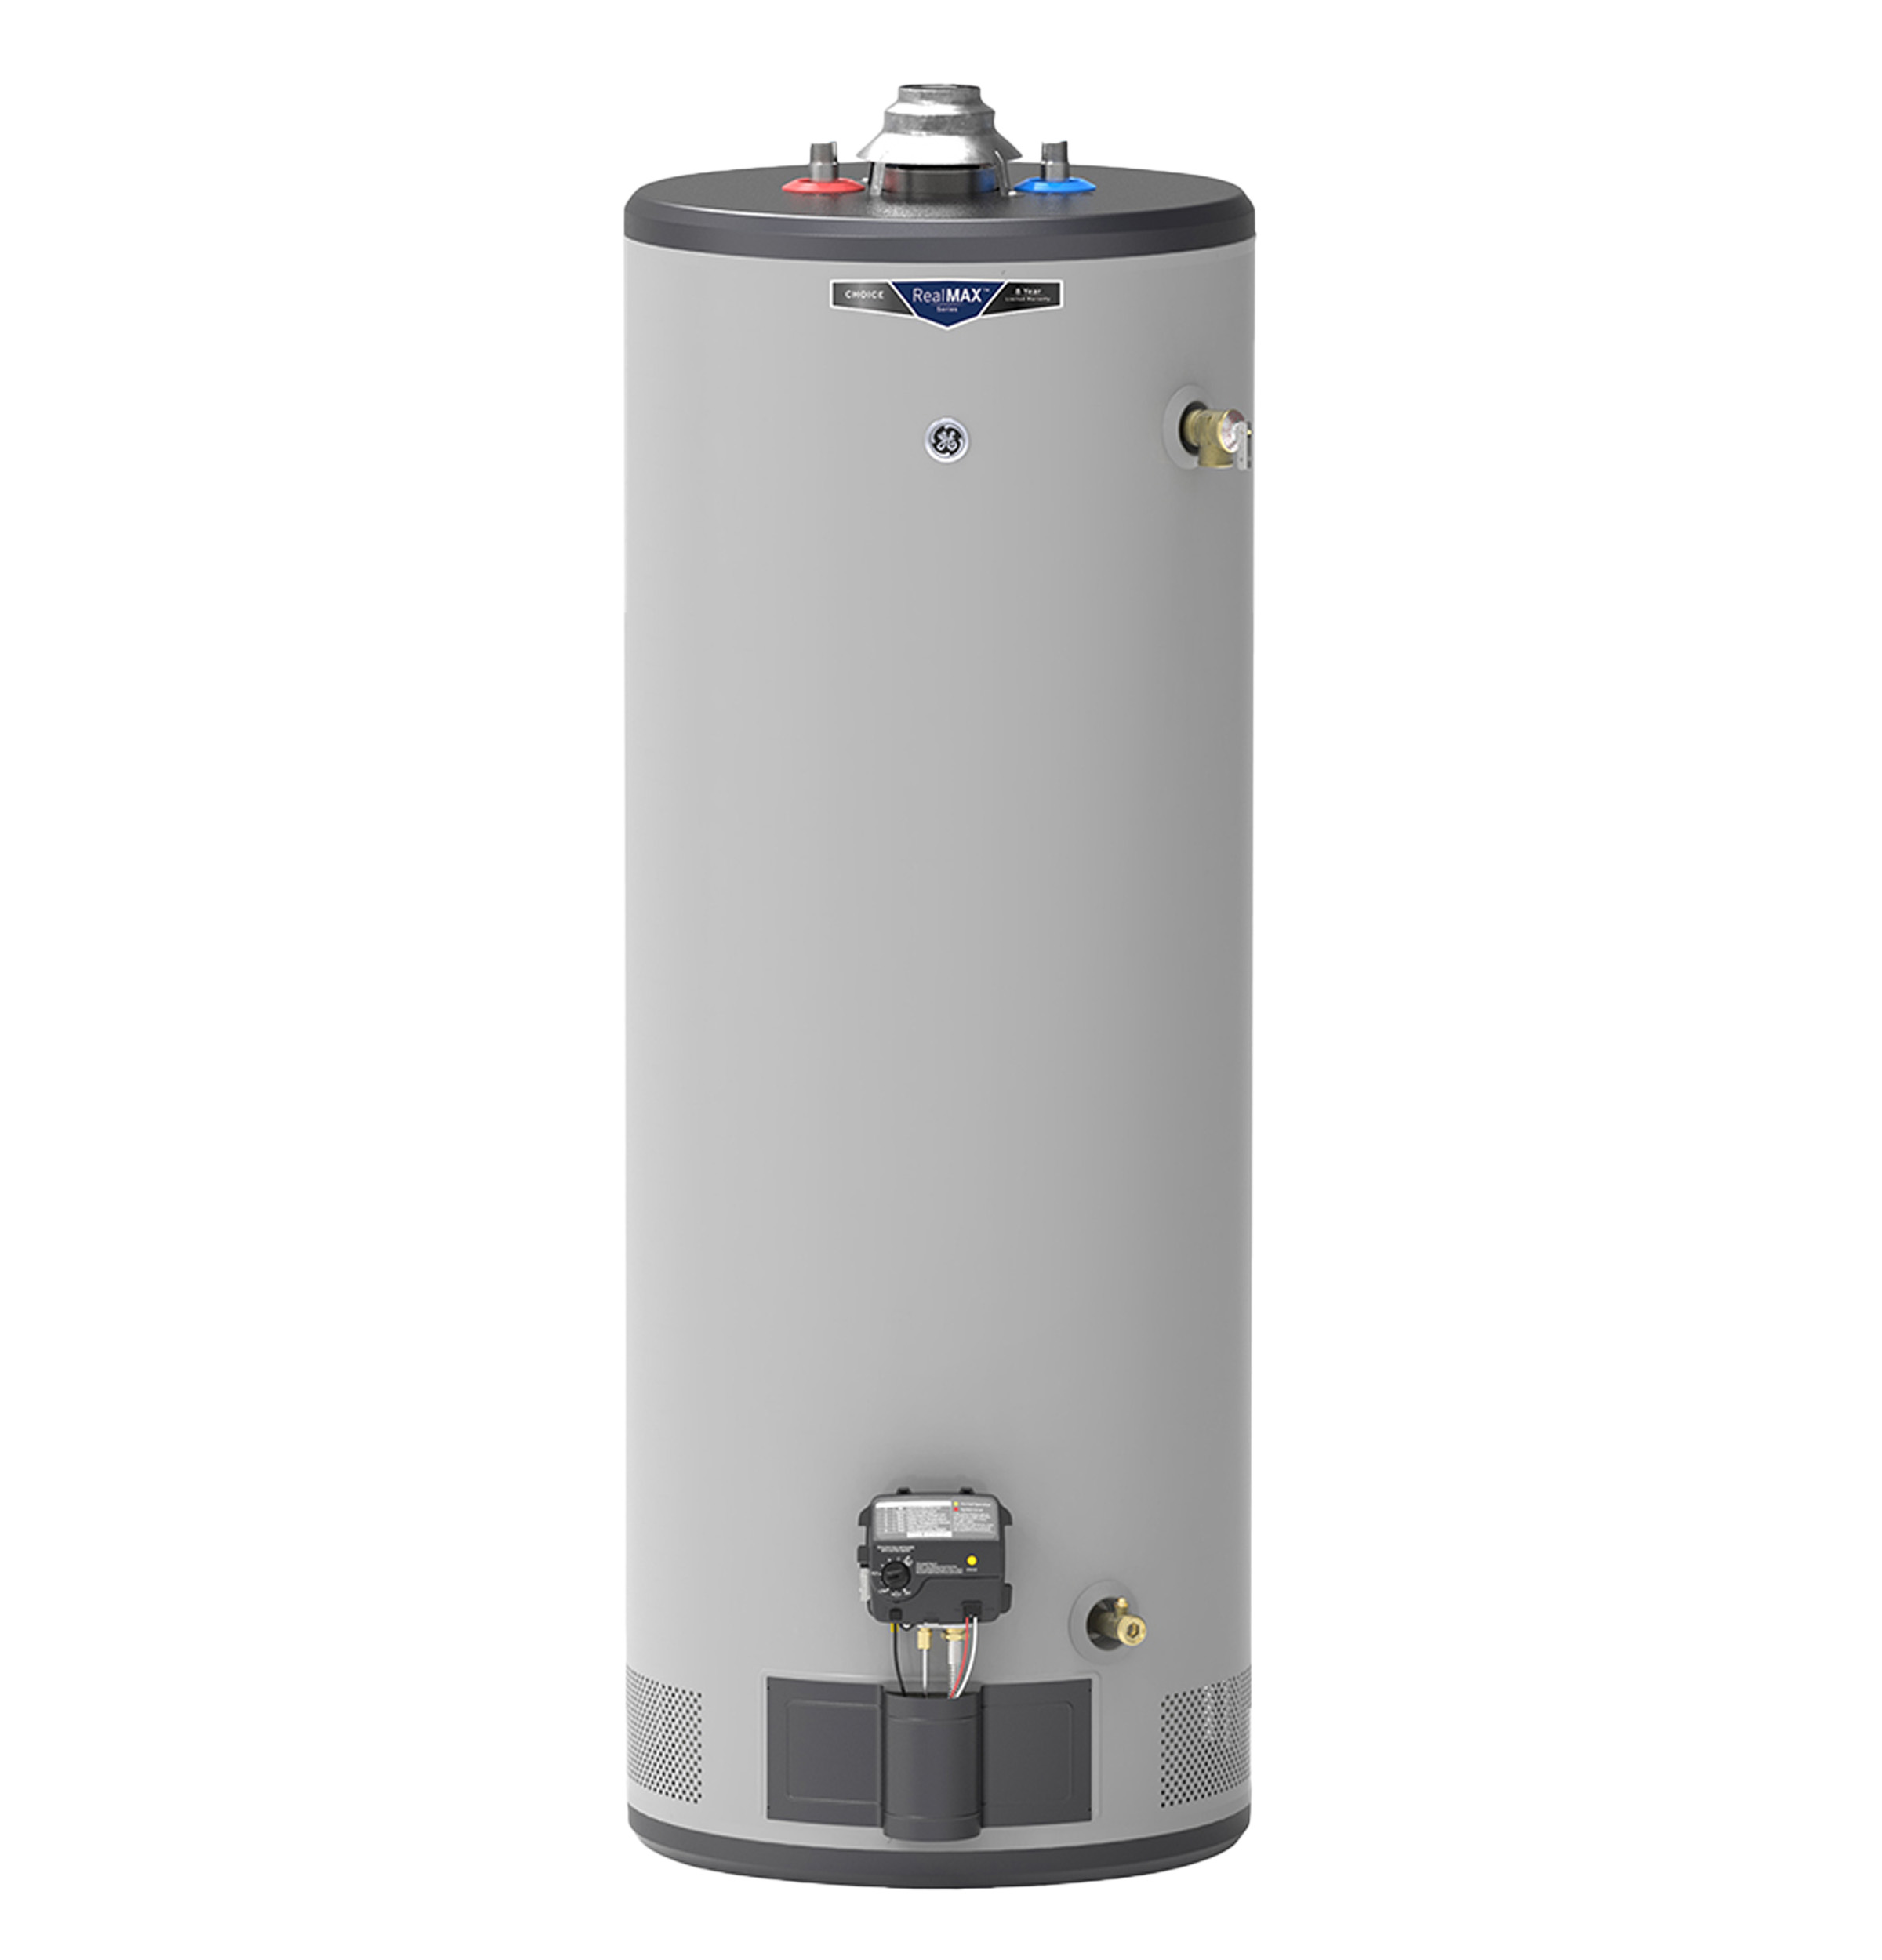 GE RealMAX Choice 50-Gallon Tall Natural Gas Atmospheric Water Heater